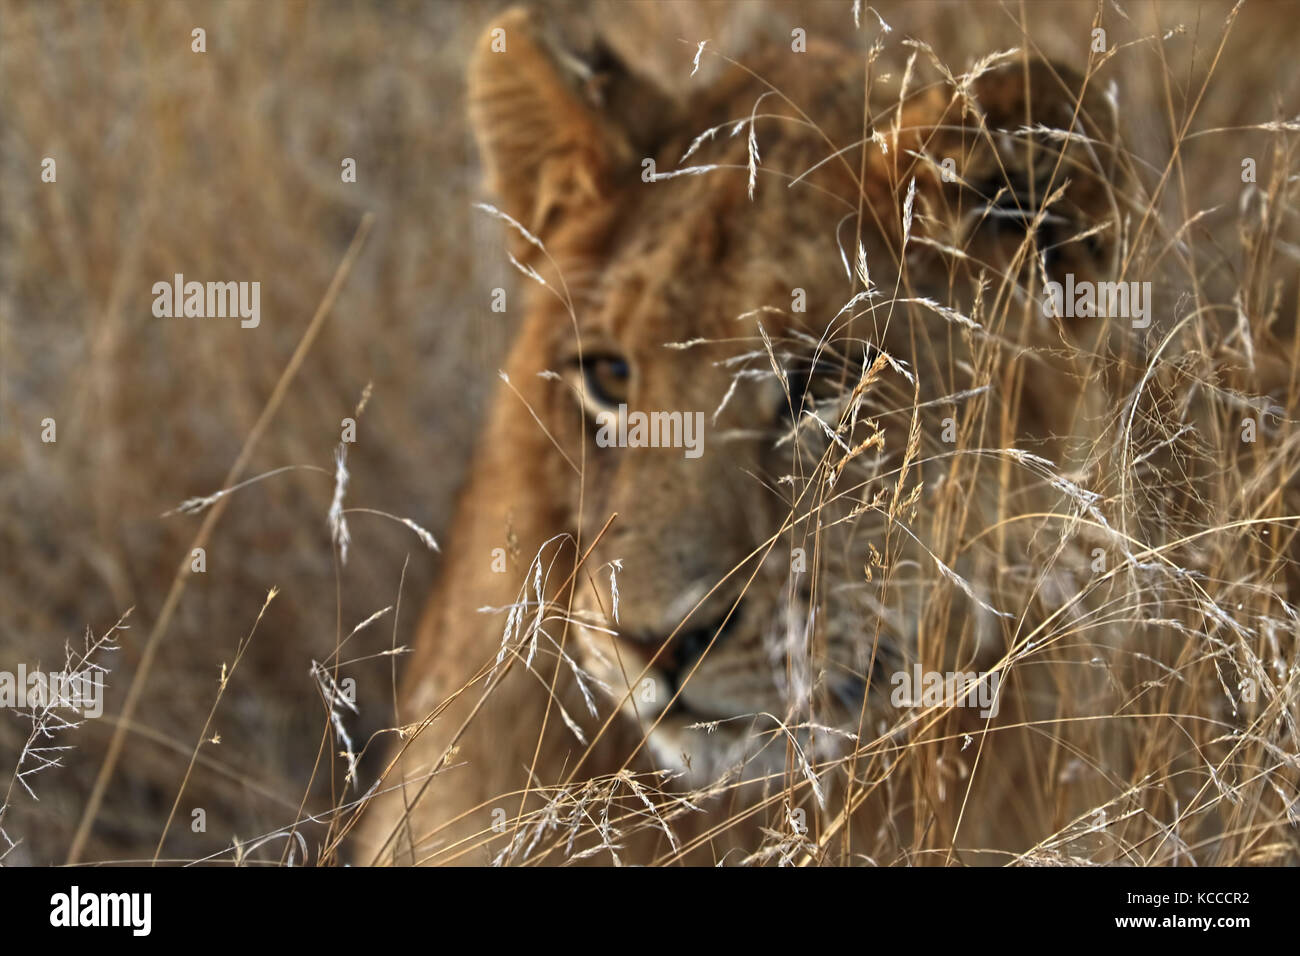 Close up of lion in the Kruger National Park, South Africa Stock Photo